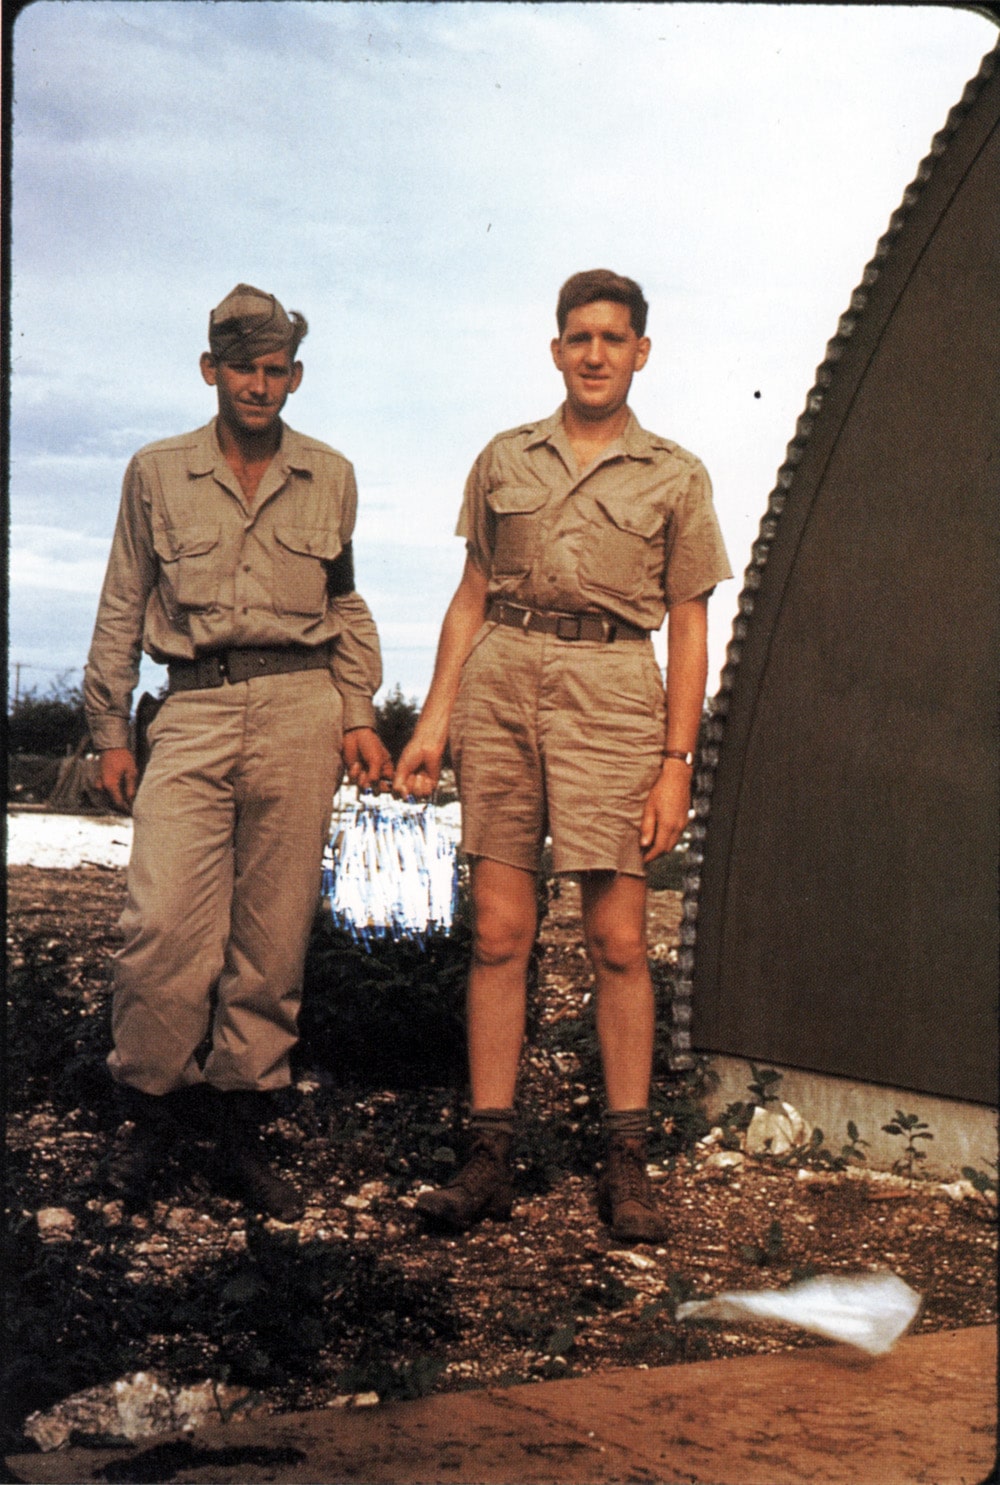 Scientists holding the container with the plutonium core that was to be the heart of the Fat Man atomic bomb. Image taken on the island of Tinian, August 1945. At right is physicist Harold M. Agnew, later to become the director of Los Alamos National Laboratory. The portion of the image showing the container itself had been scratched out by the FBI in 1946, in an effort at secrecy. Now, of course, this photo is declassified, as are all the materials published here. (Agnew also managed to sneak a camera onto Bockscar which was used by one of the crew to take the photos of bomb damage. No one on the plane knew how to operate the official camera because the official cameraman was not on the plane, due to a mishap.) Photo taken by Harold Agnew. Image courtesy of the Los Alamos National Laboratory